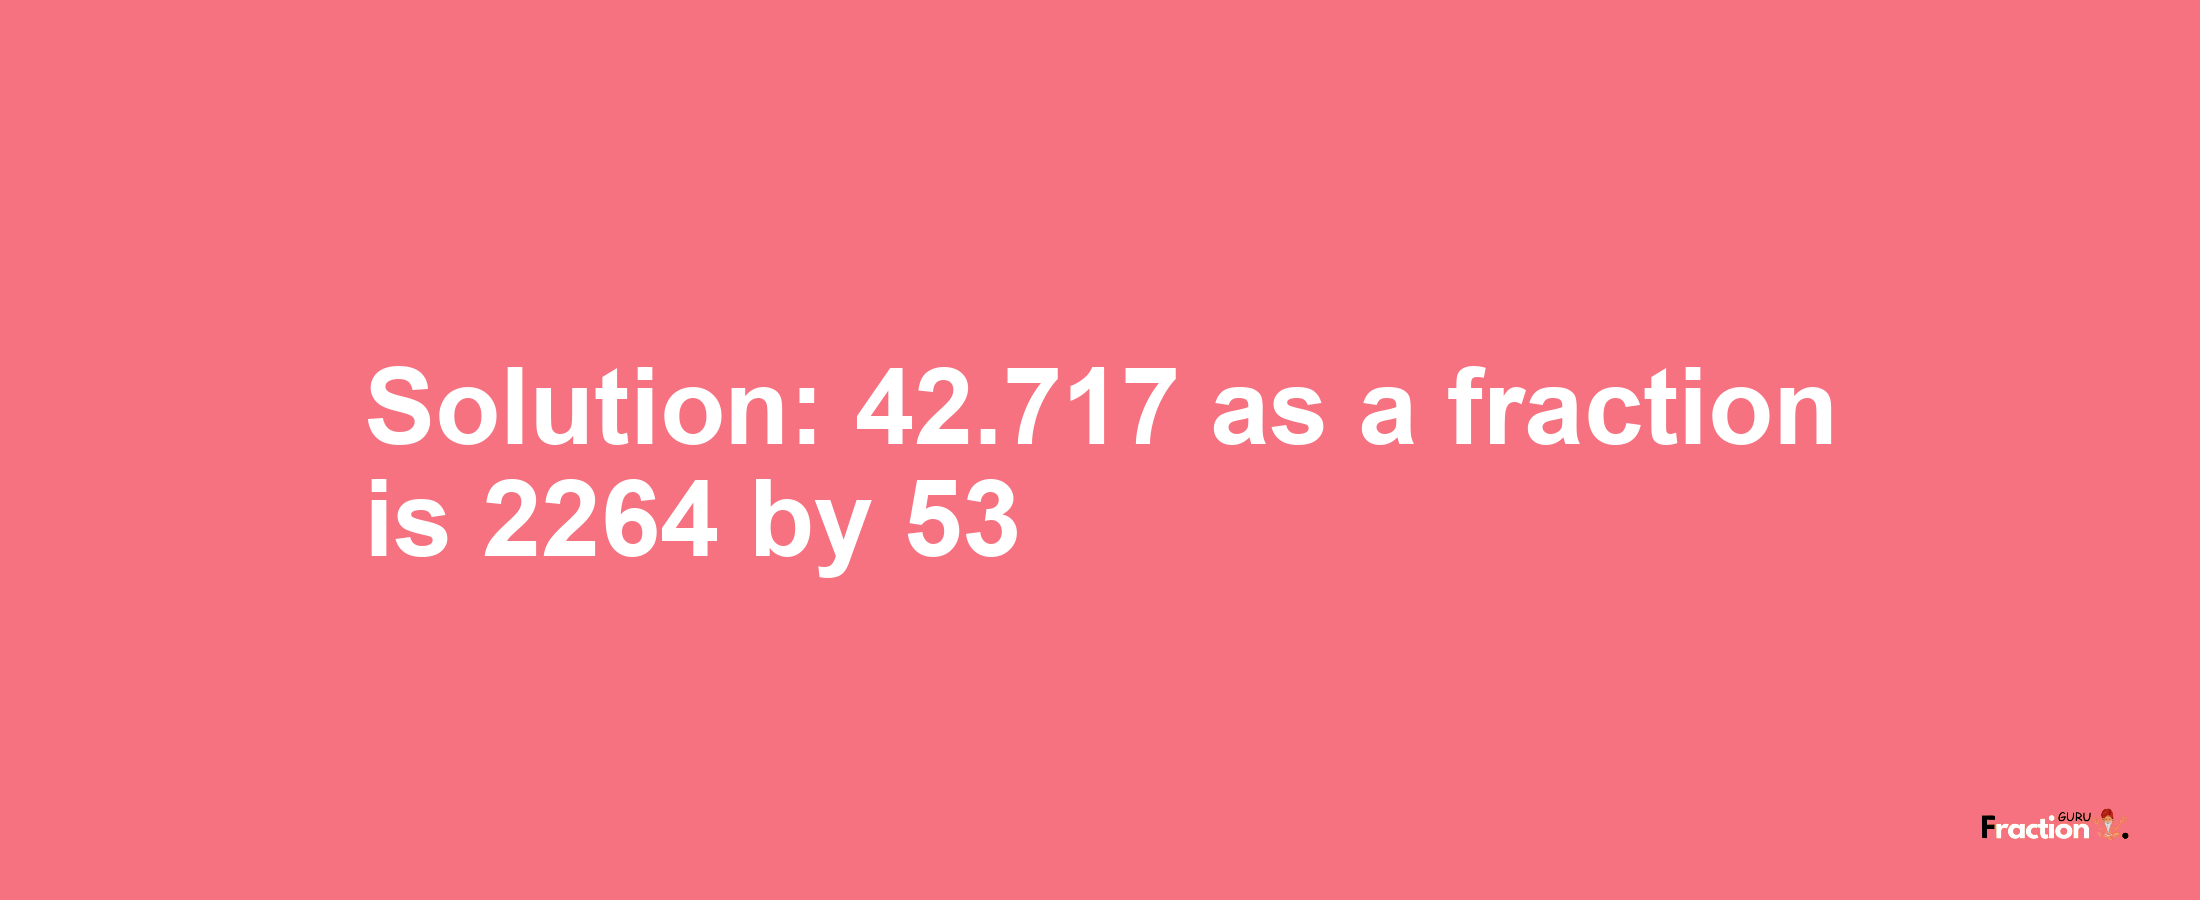 Solution:42.717 as a fraction is 2264/53